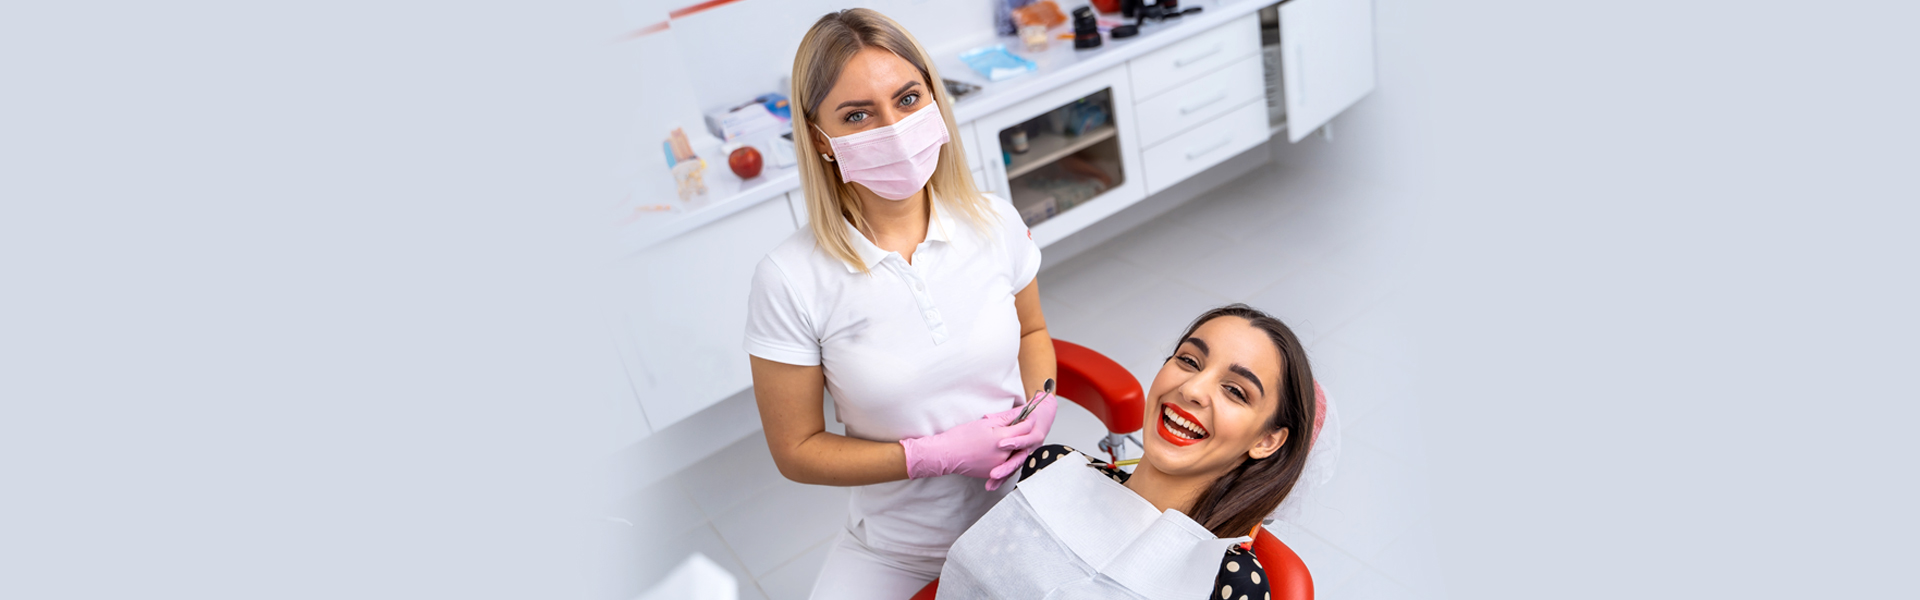 How Often Should You Have Your Teeth Cleaned by a Dentist?